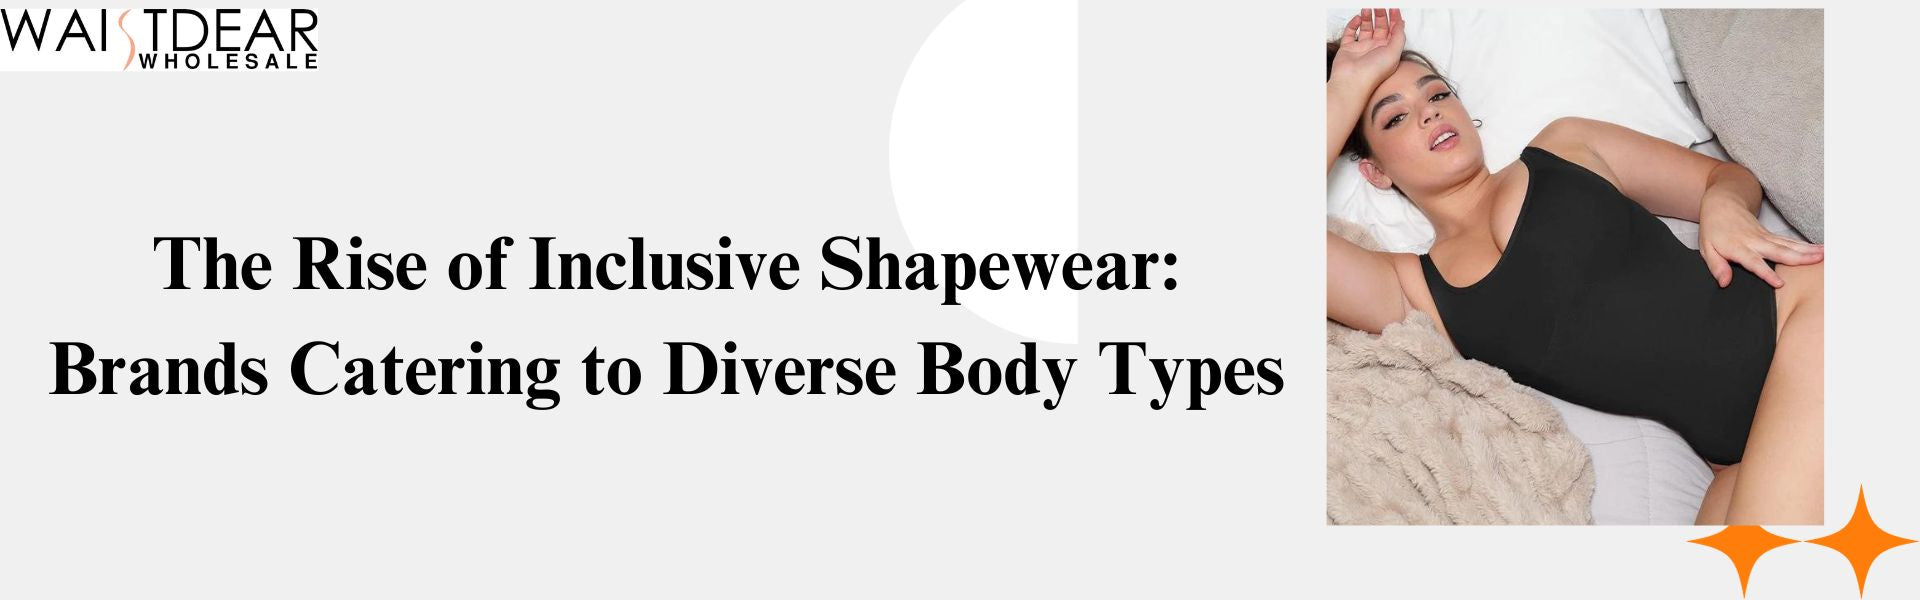 The Rise of Inclusive Shapewear: Brands Catering to Diverse Body Types